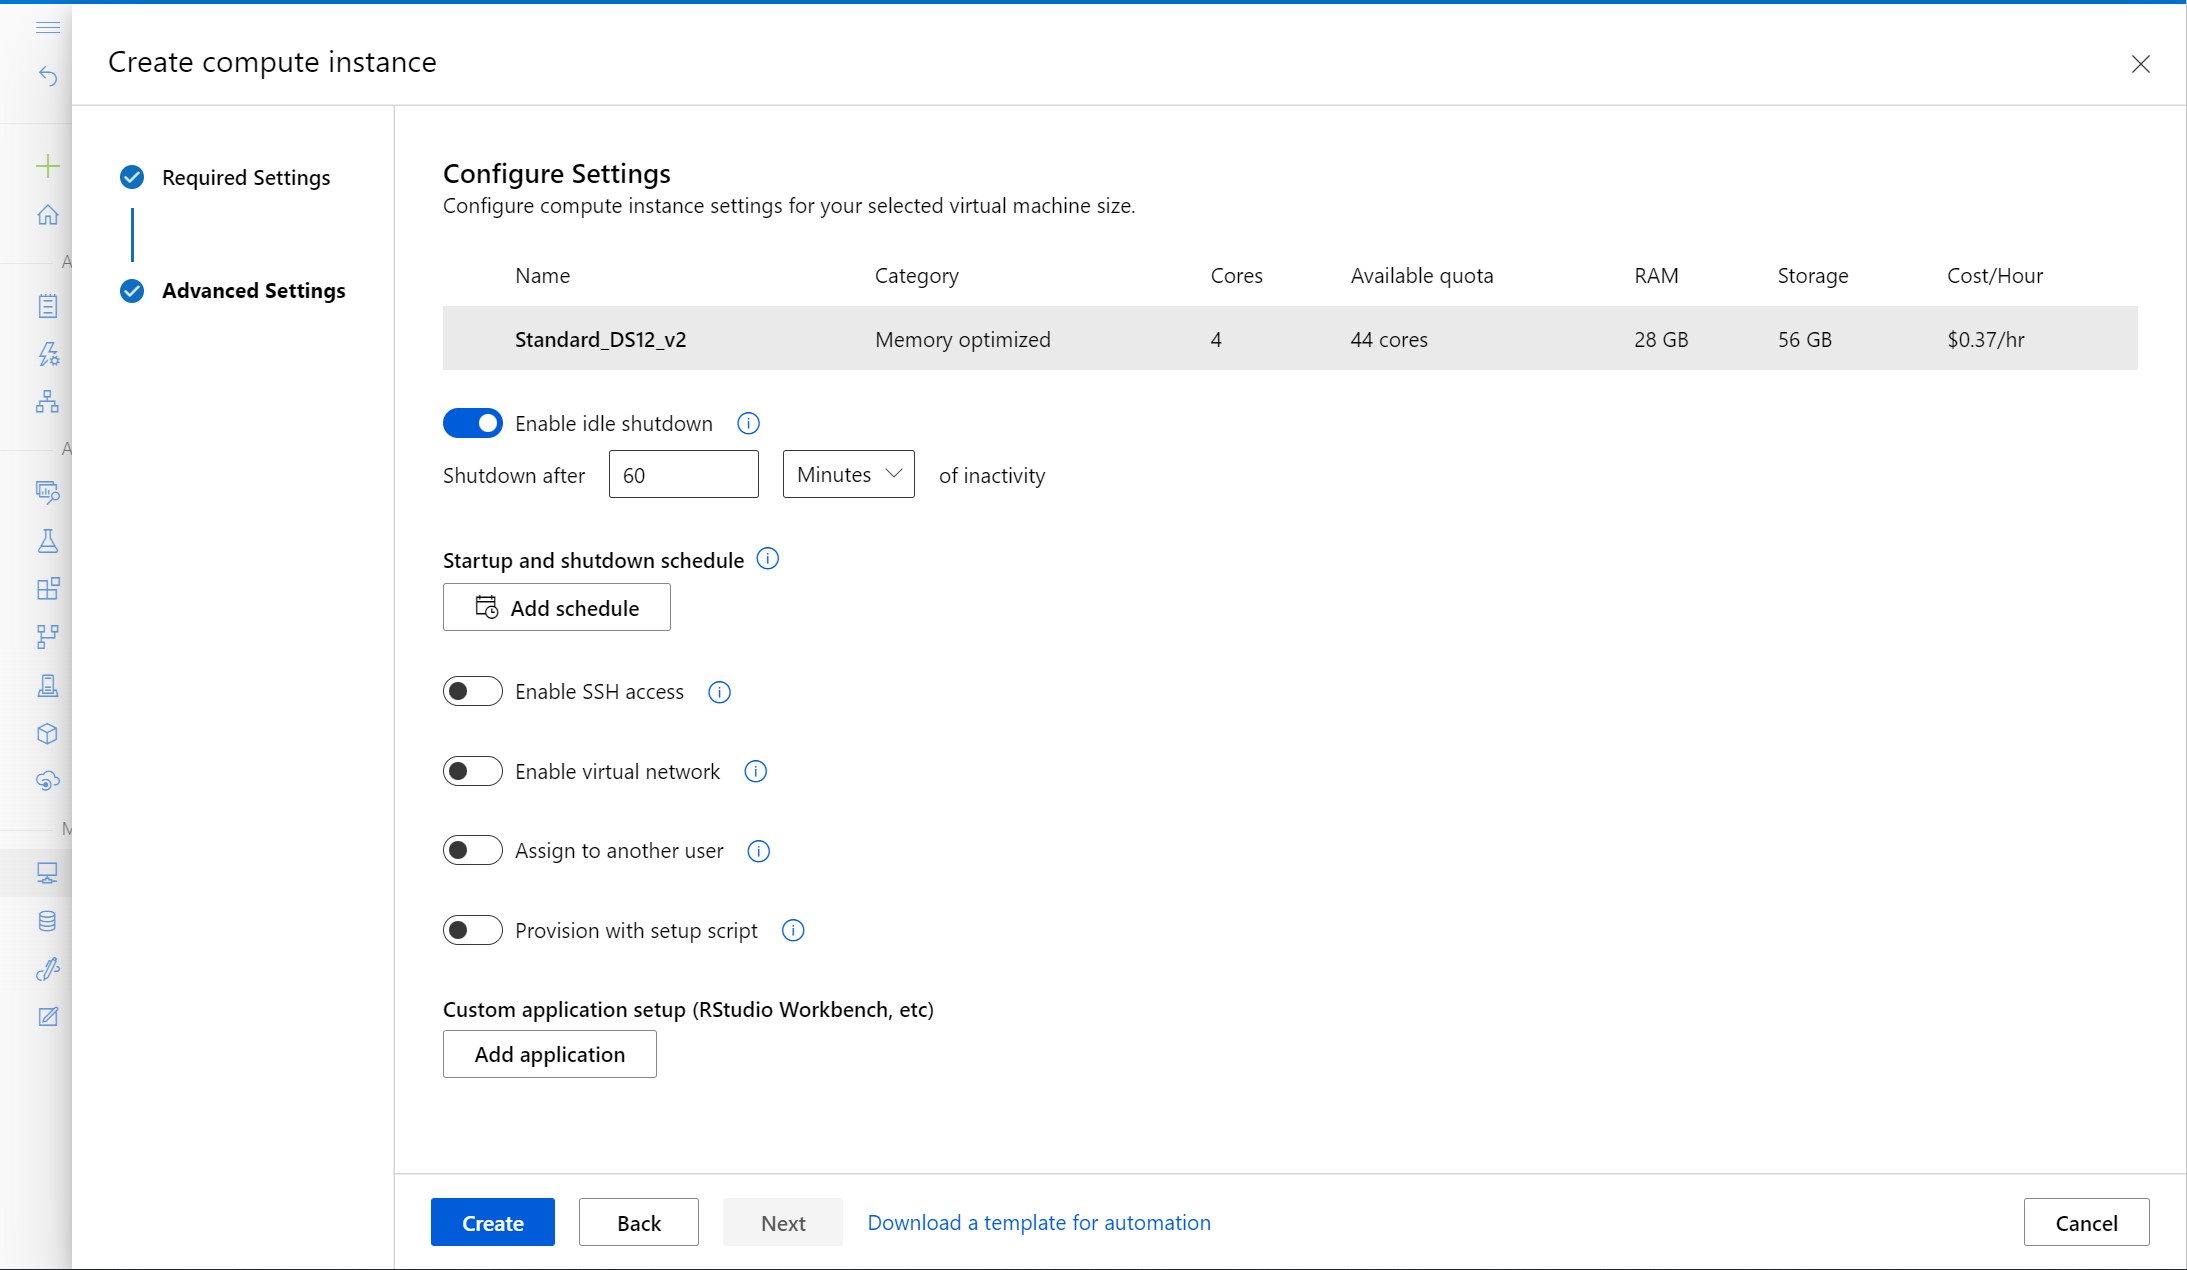 Screenshot of the Advanced Settings page for creating a compute instance